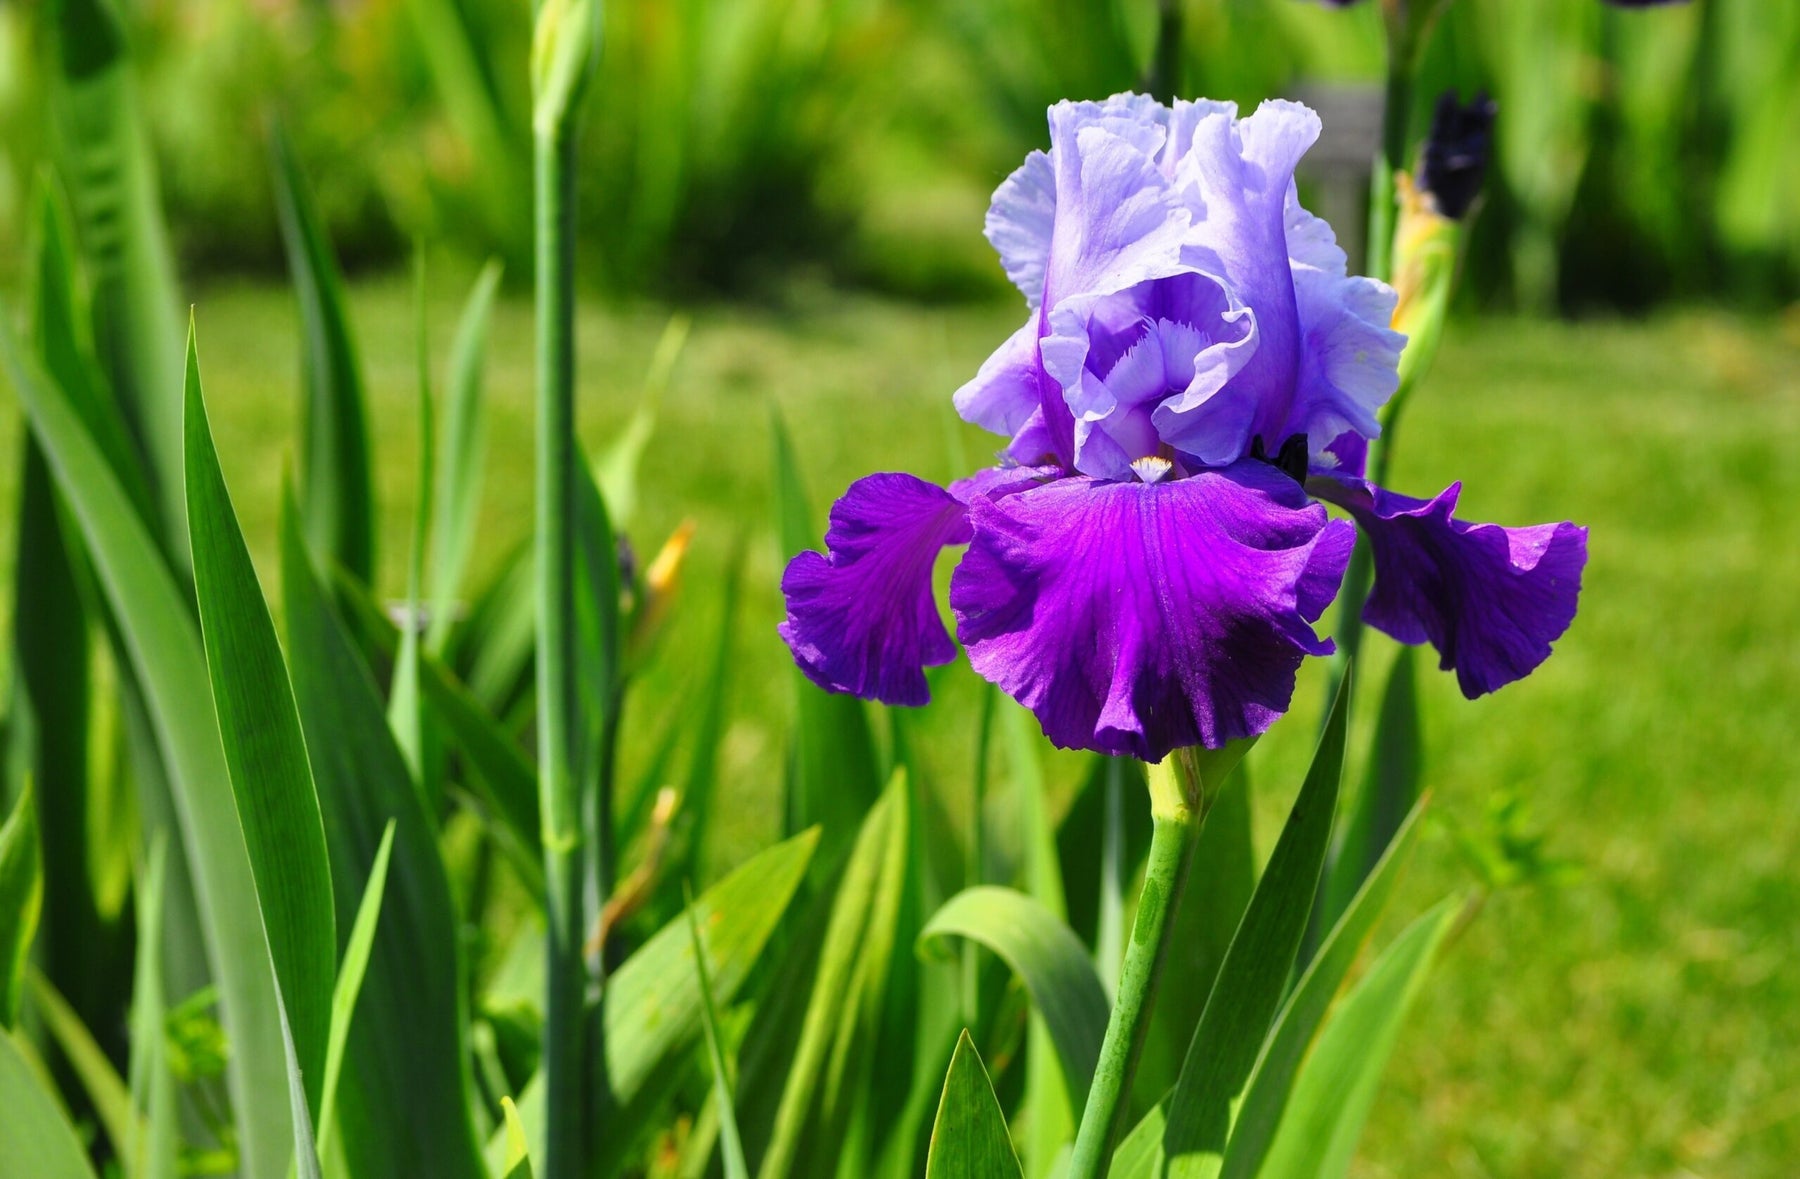 Iris Flowers : The Link Between Heavens and Earth